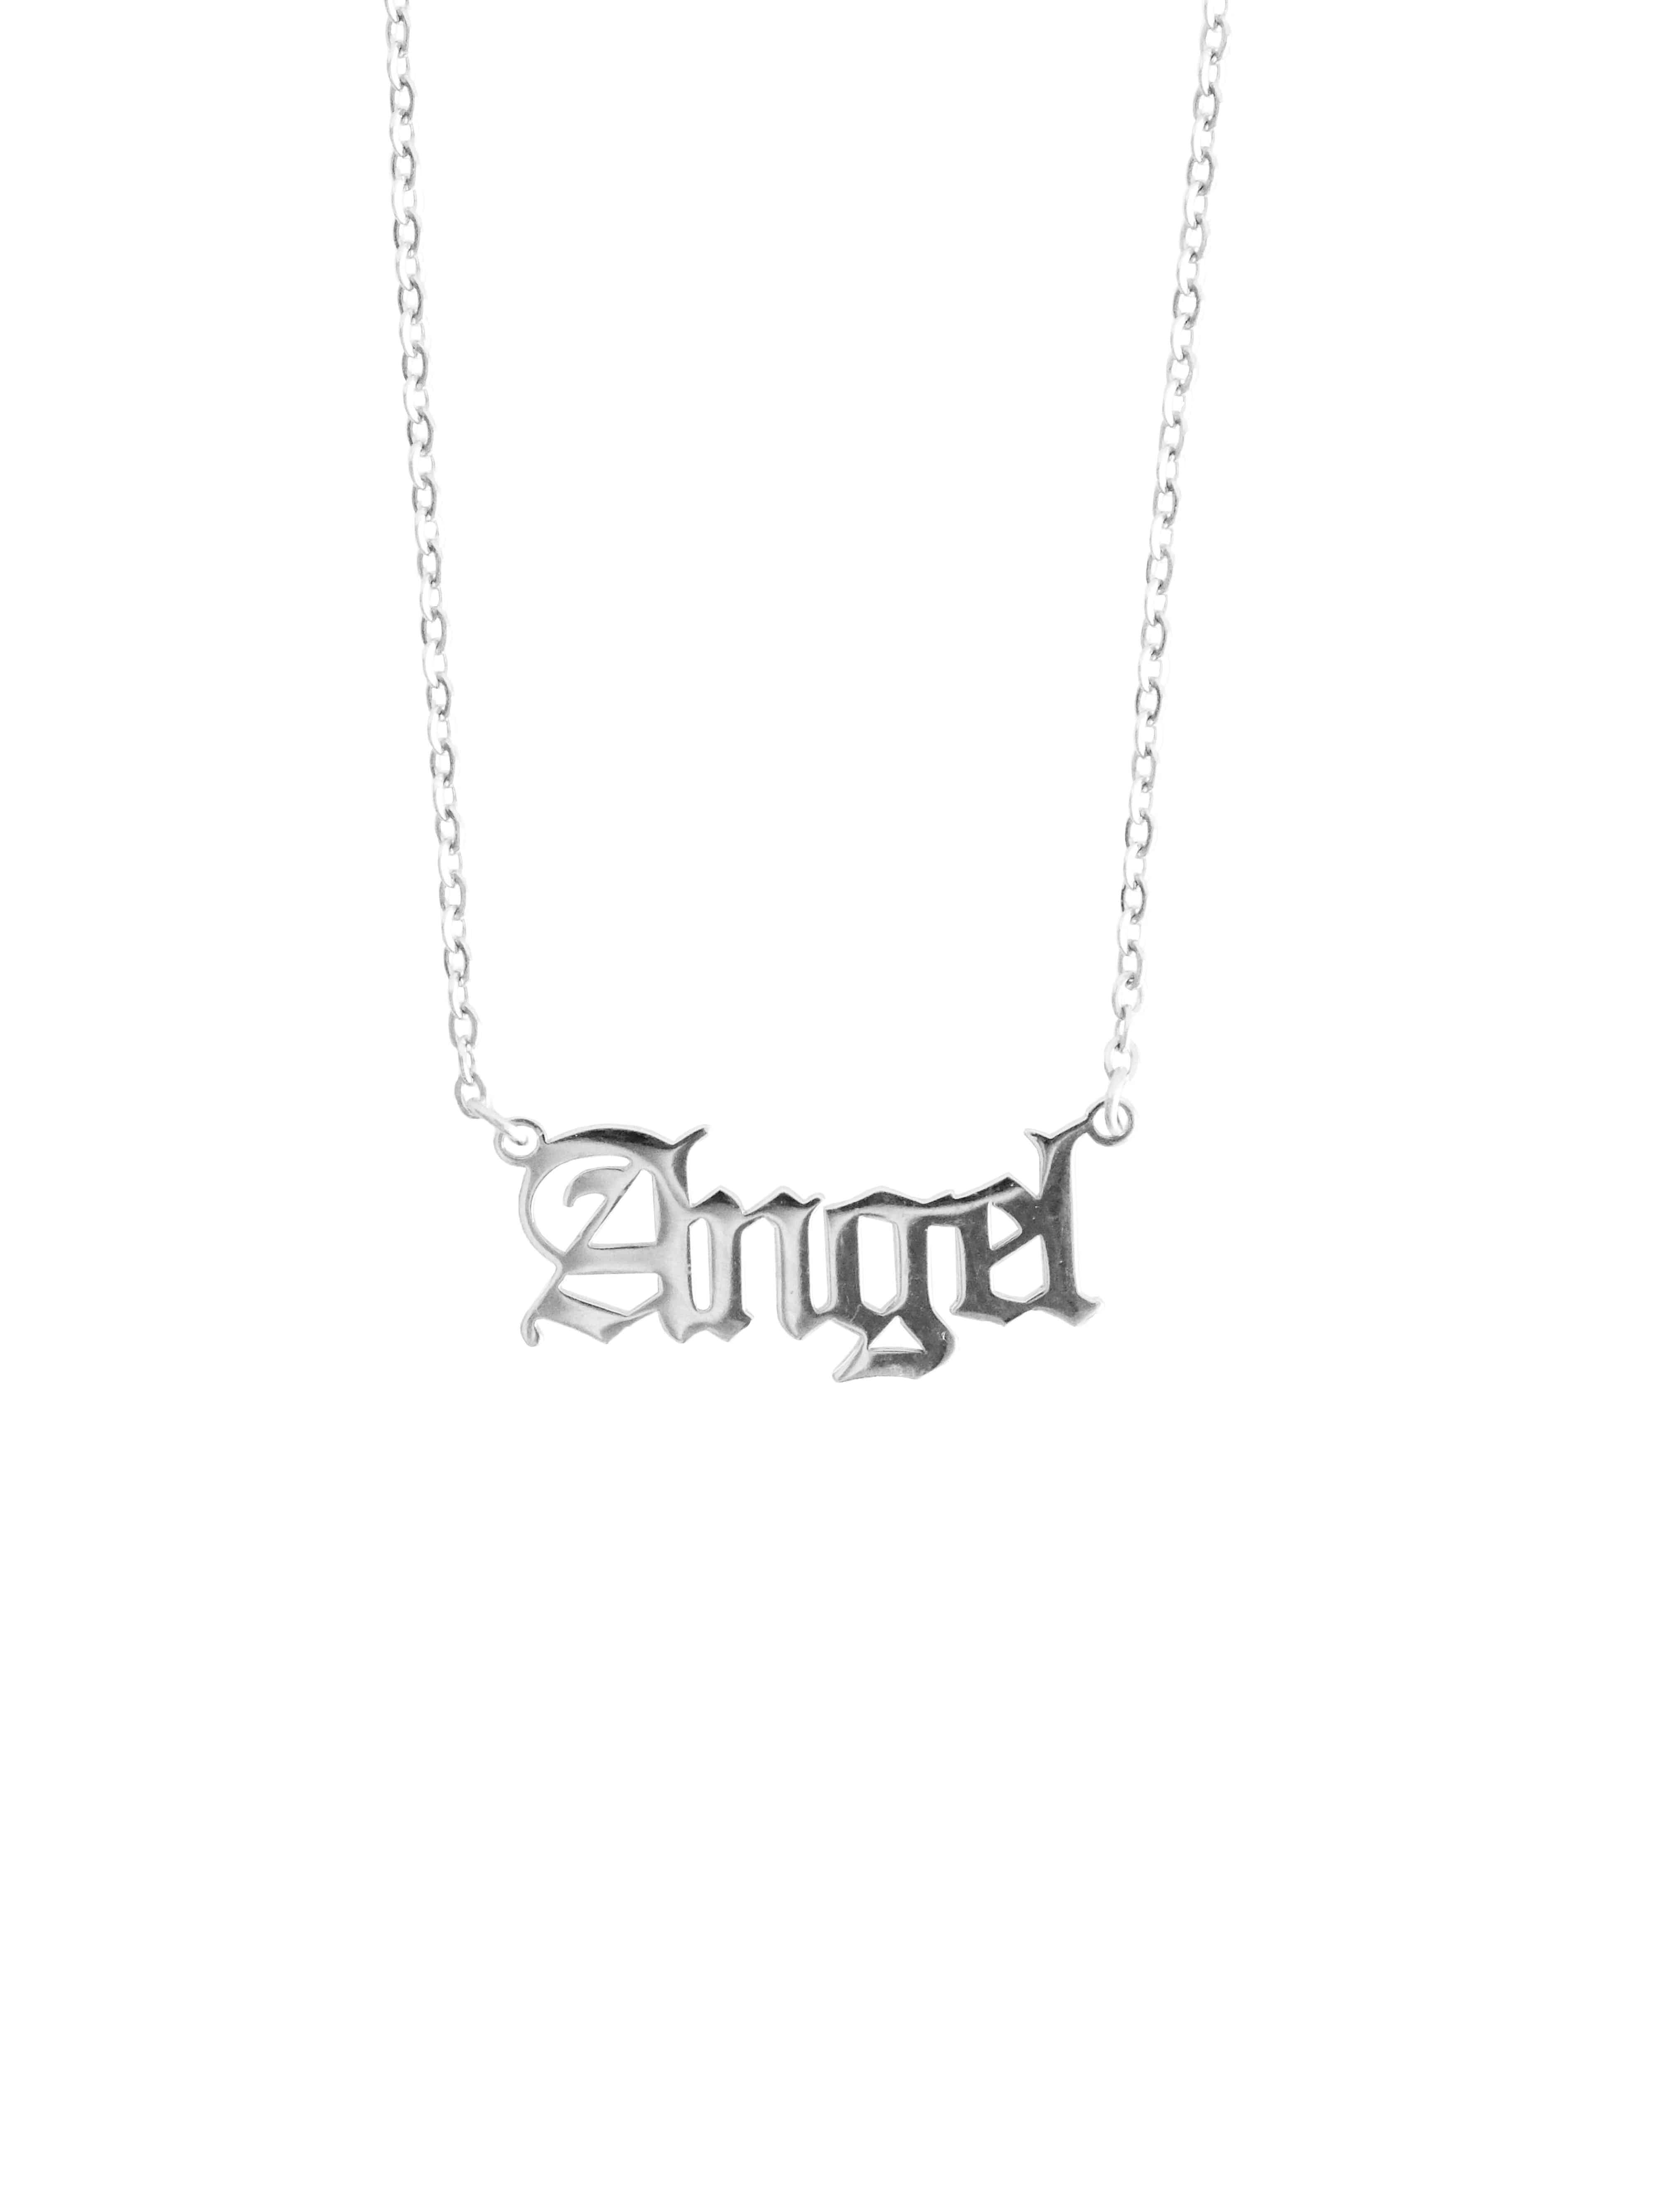 [RESTOCK] FOUNDᐝ Angel necklace (*2시 이전 단독 주문시 당일출고)